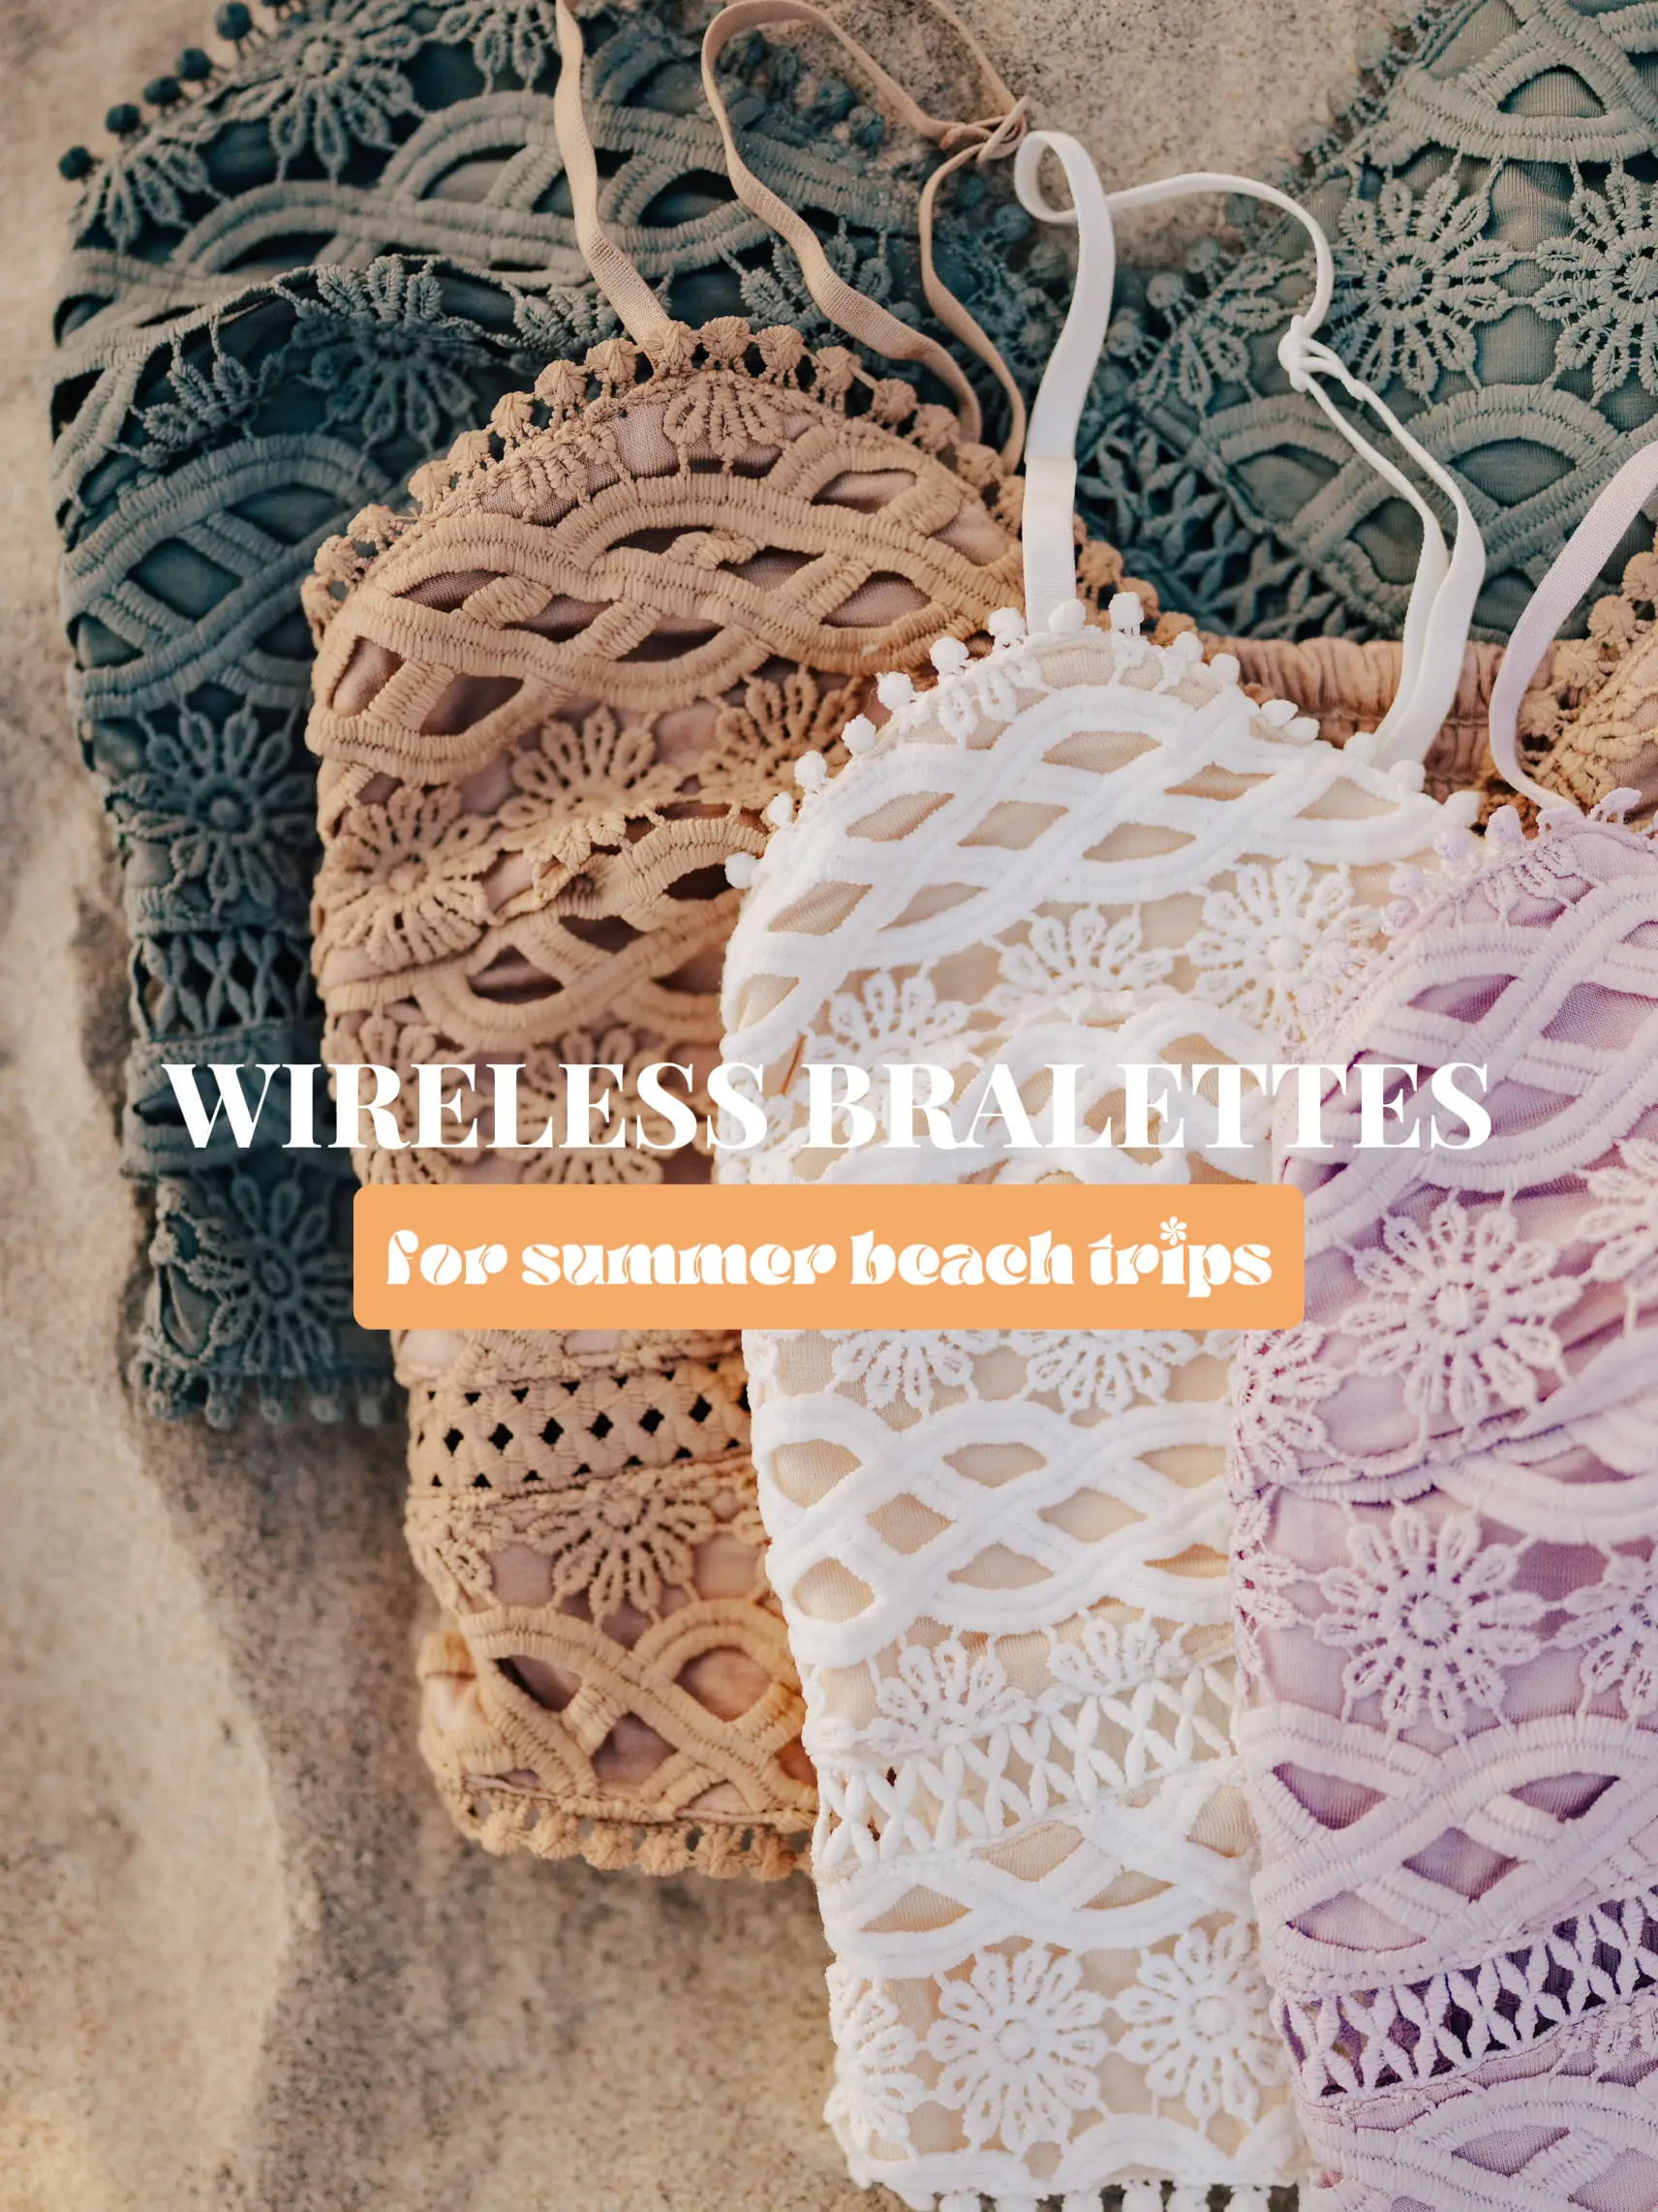 Stylish Bralettes For Summer Beach Trips, Gallery posted by Lani + Kei